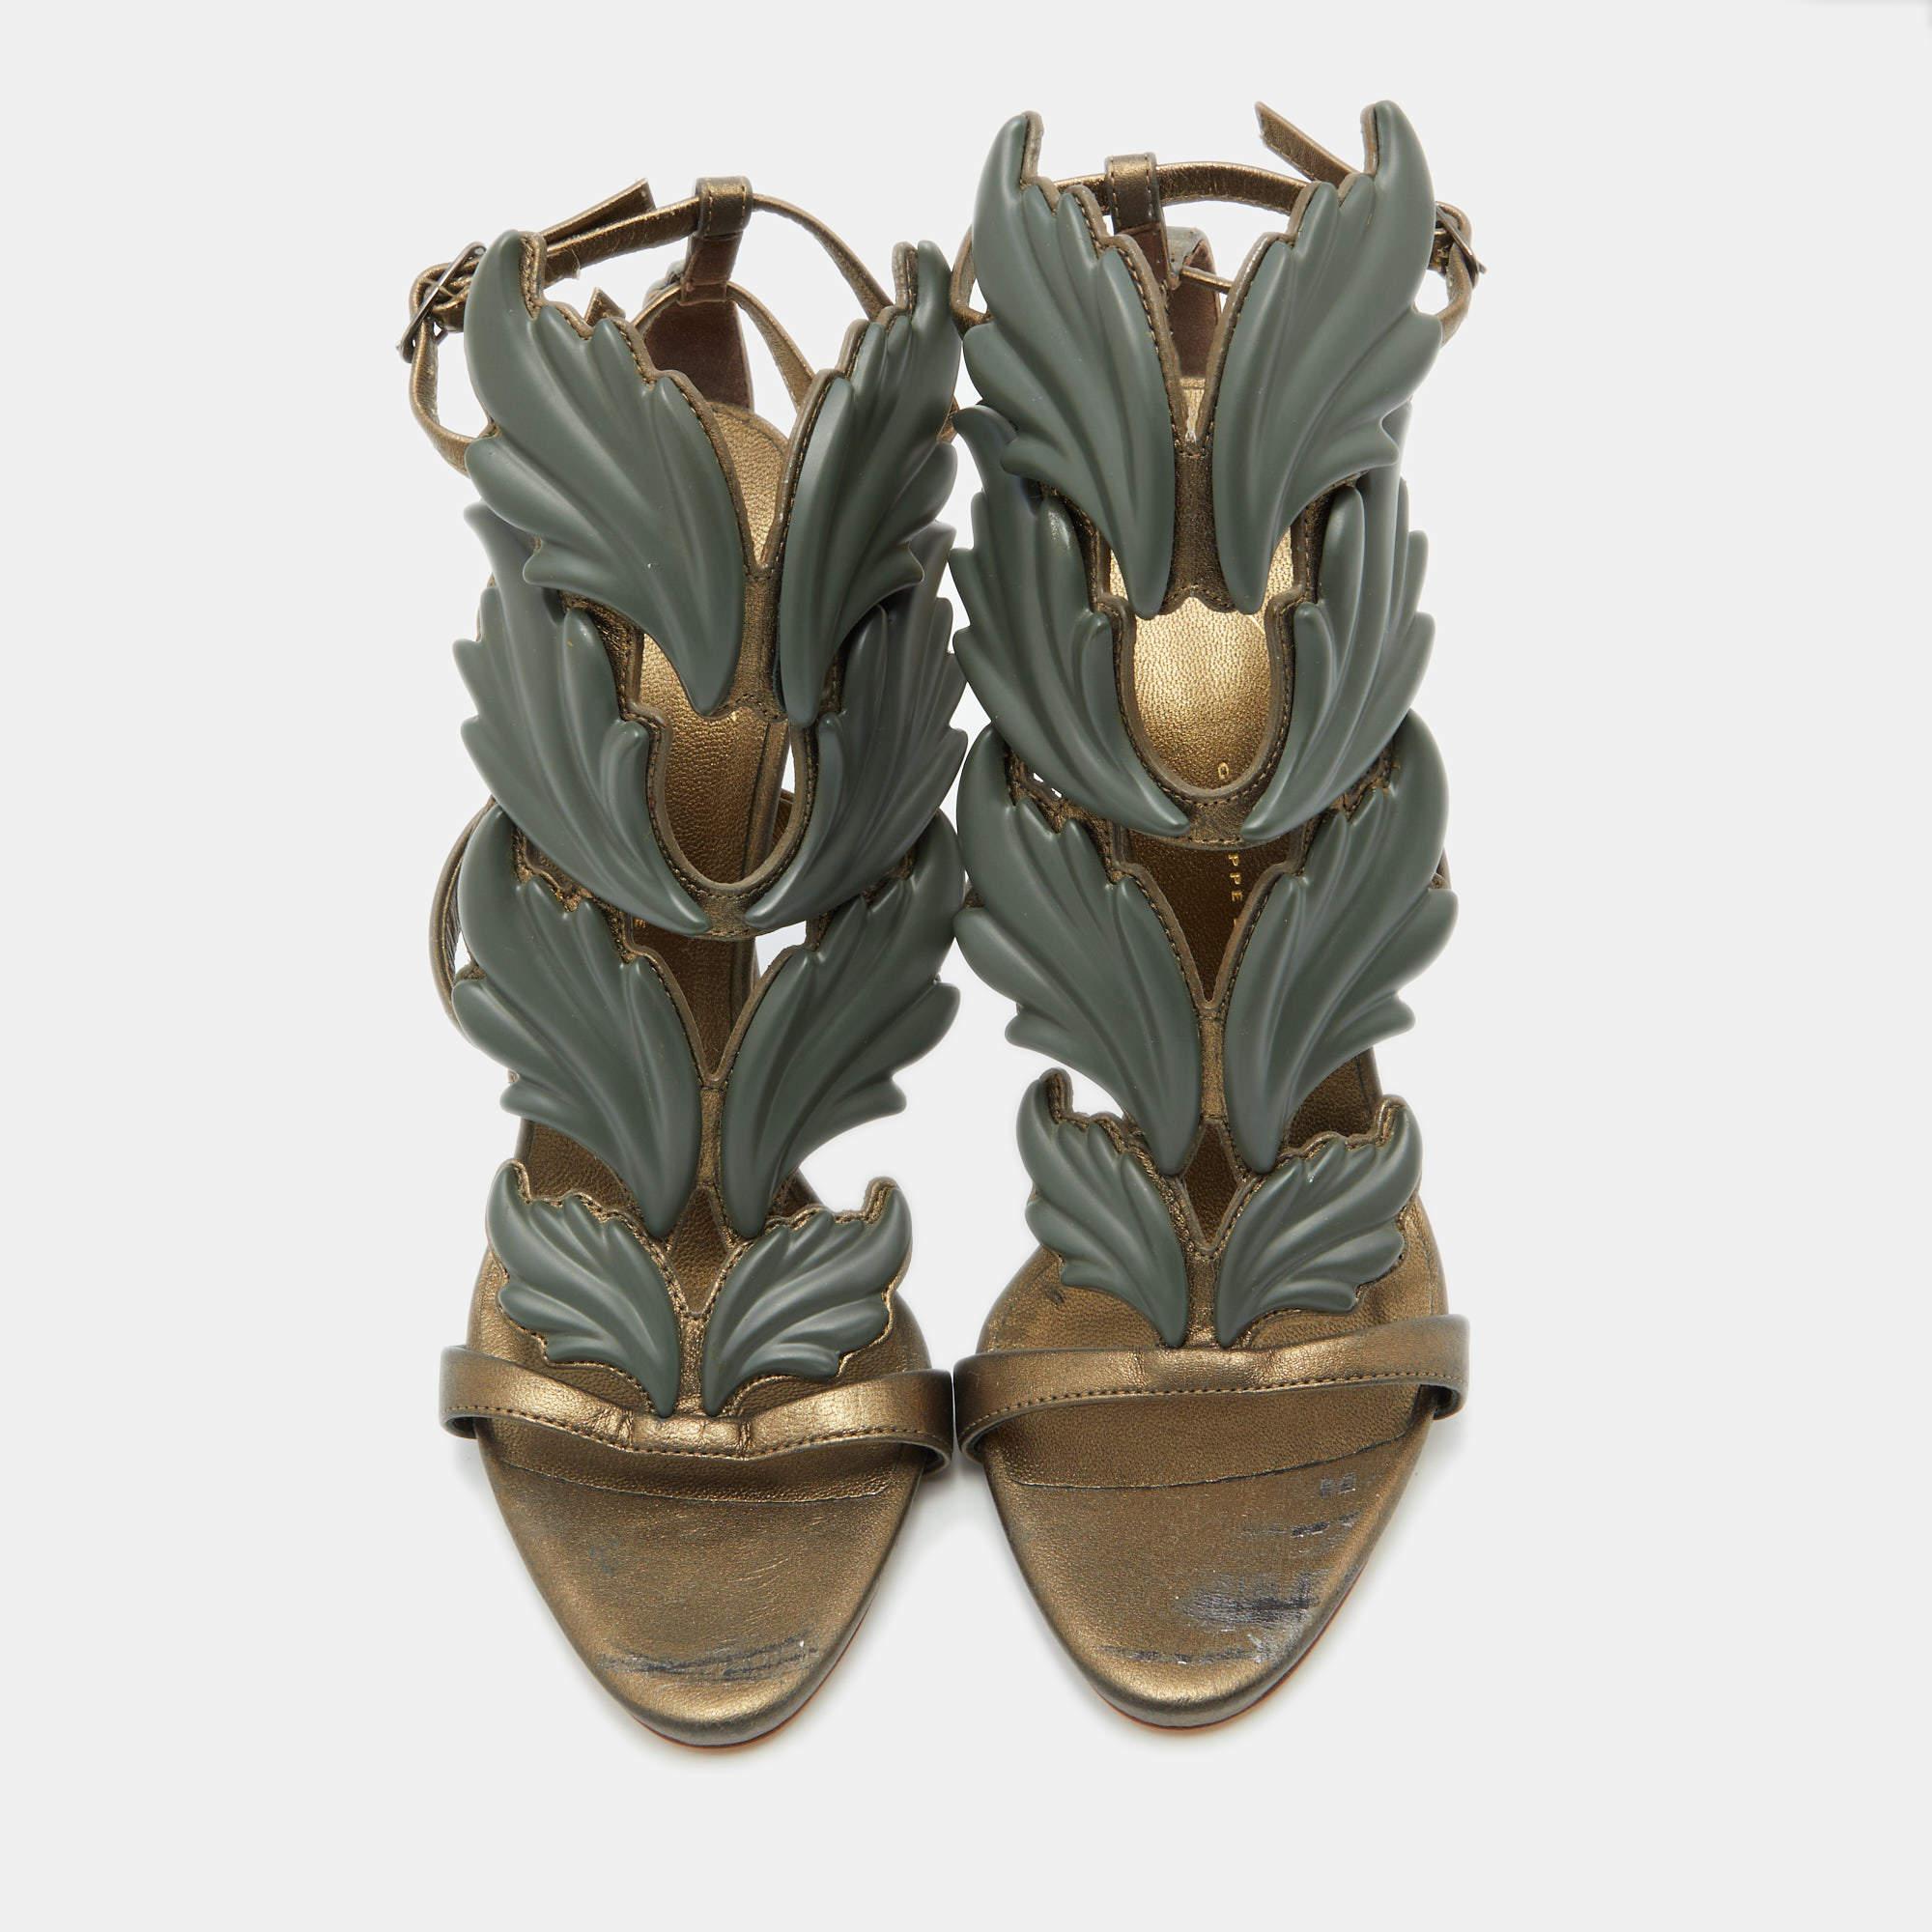 Giuseppe Zanott's Cruel Summer sandals are all about making a statement with your fashion. These in olive green are made using leather, and they feature the signature wings on the front.

